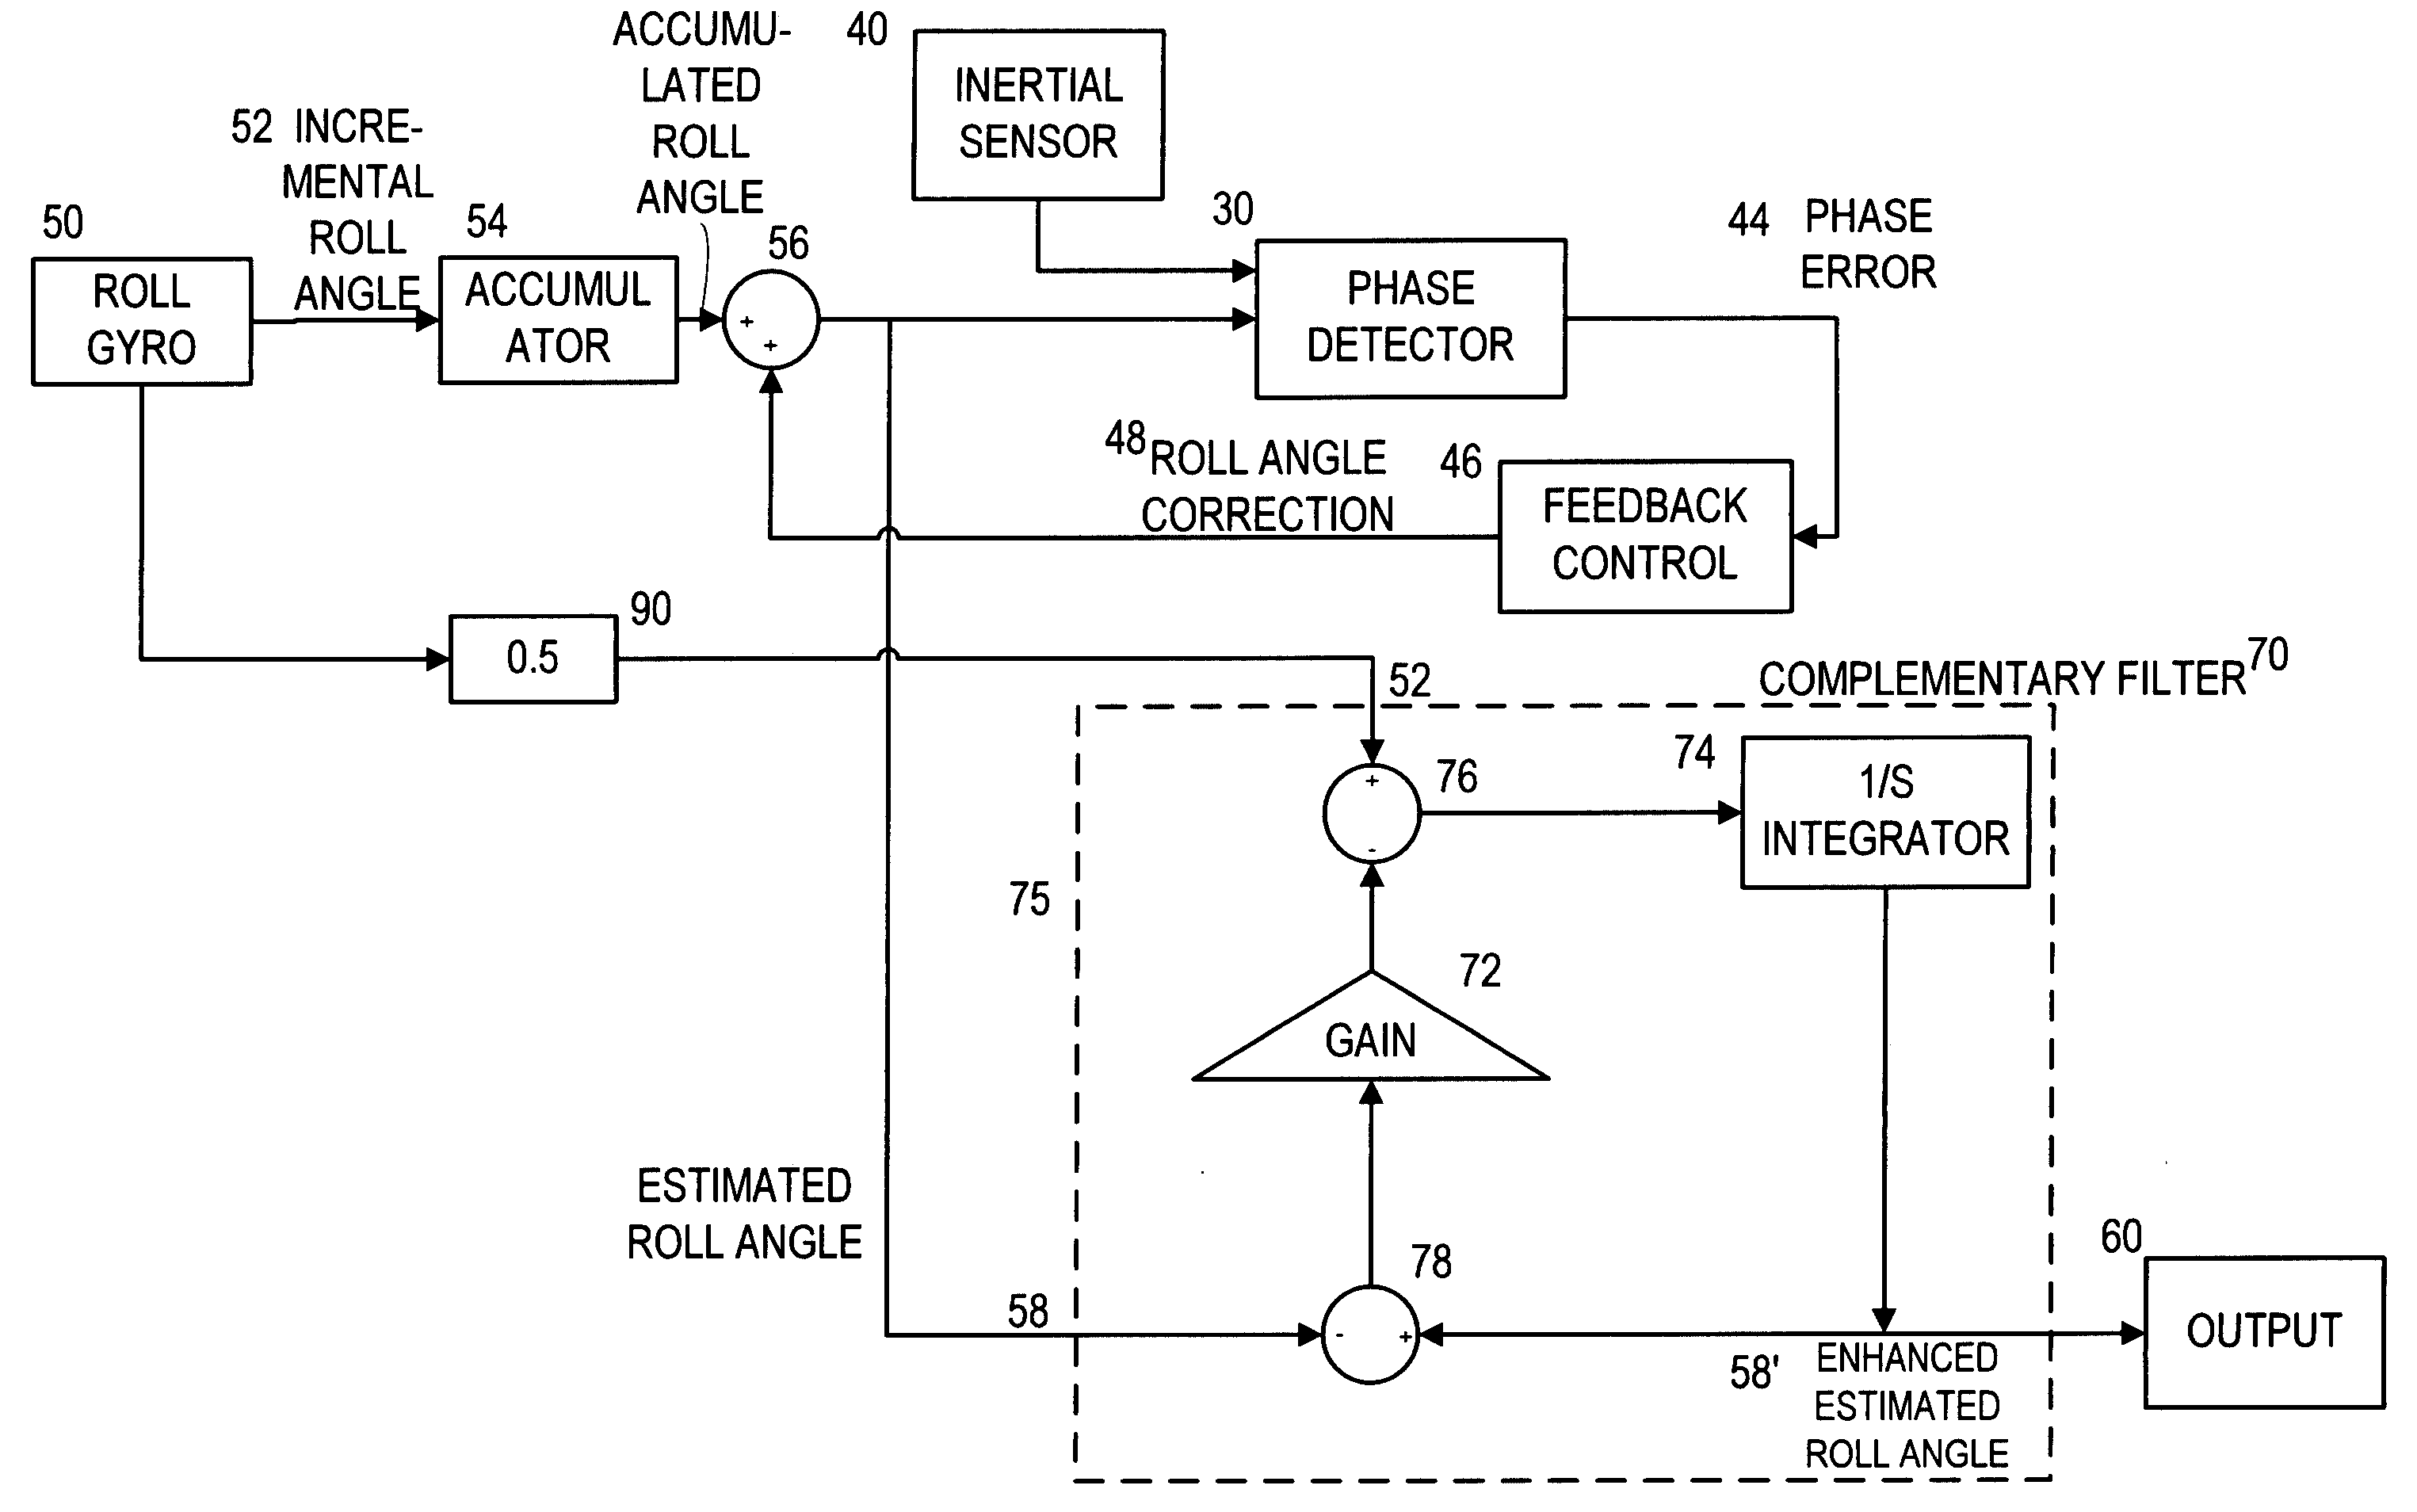 Apparatus and appertaining method for upfinding in spinning projectiles using a phase-lock-loop or correlator mechanism